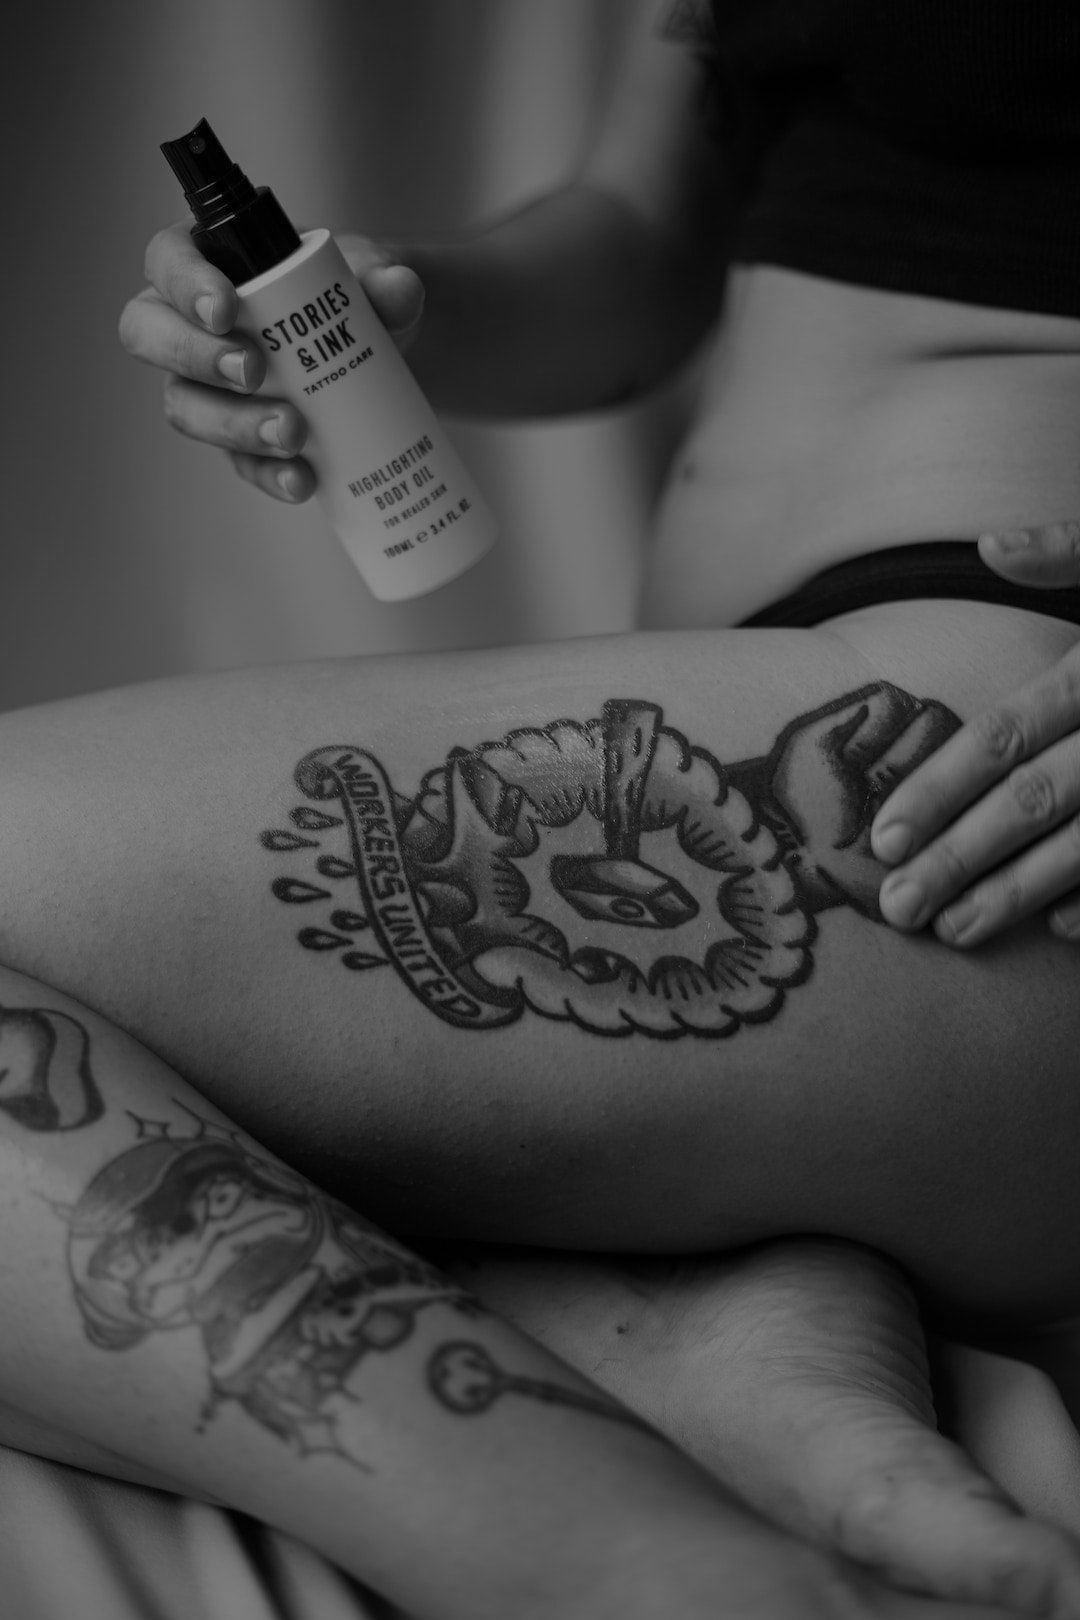 How to Properly Care for Your New Tattoo